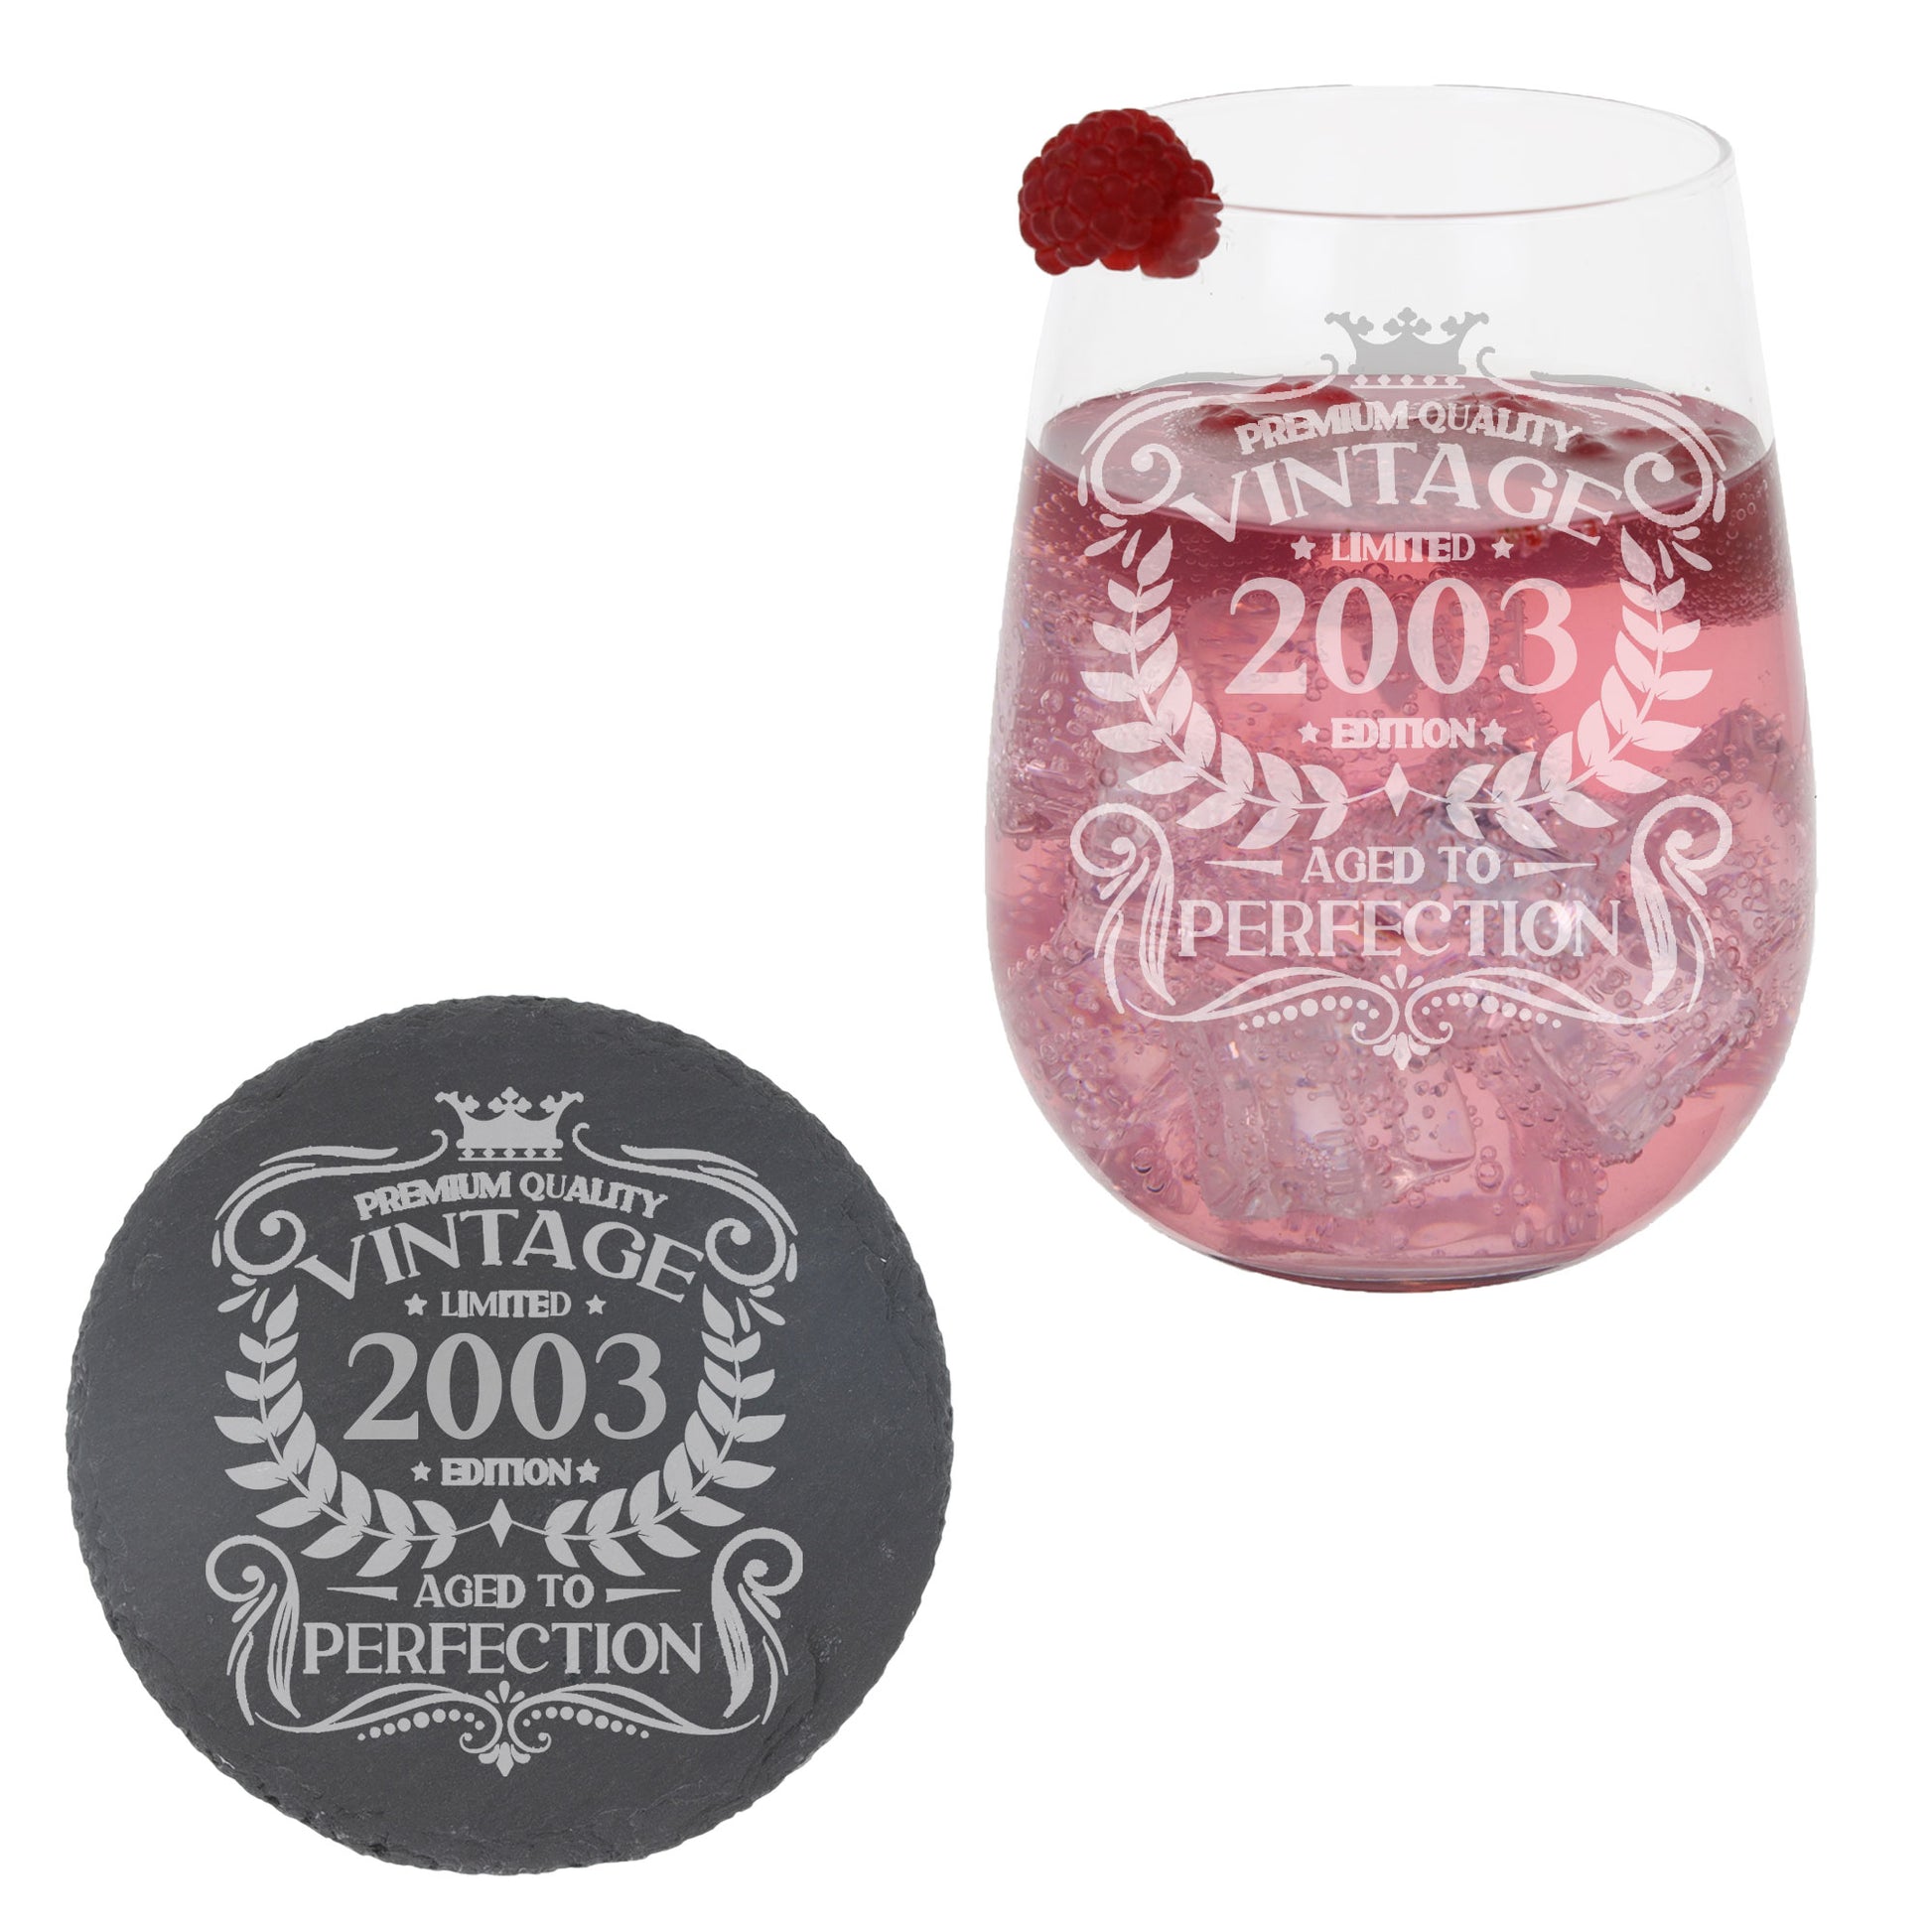 Vintage 2003 20th Birthday Engraved Stemless Gin Glass Gift  - Always Looking Good -   